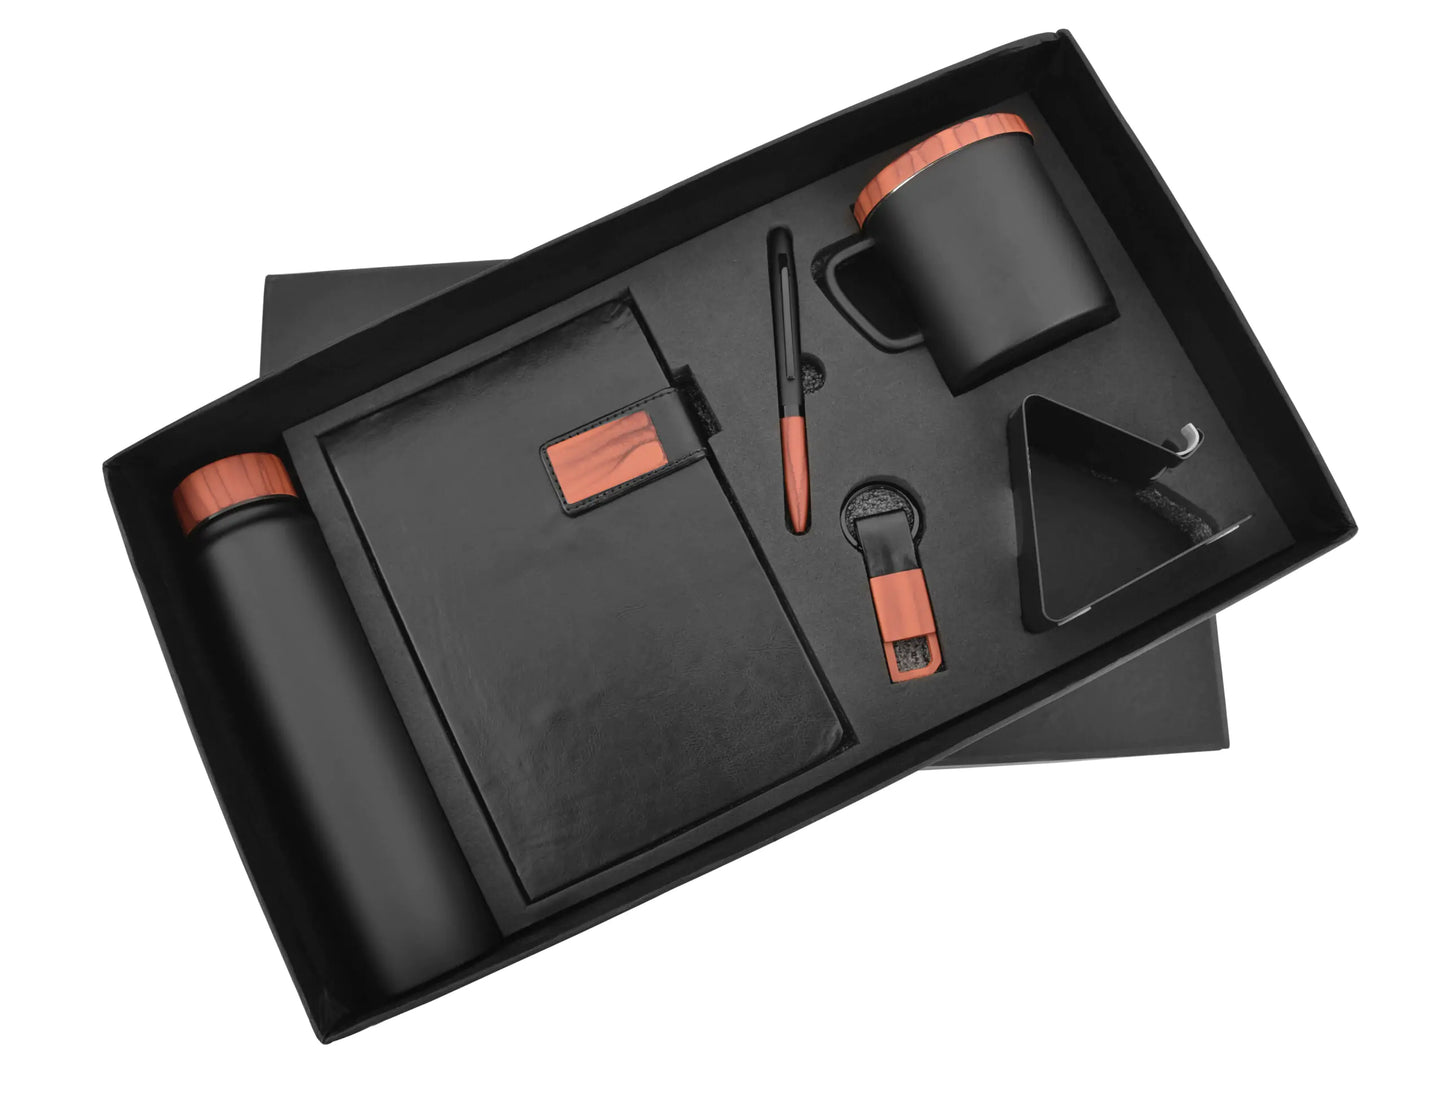 Notebook Diary, Keychain, Bottle, Mug, Mobile Stand and Pen 6in1 Combo Gift Set - For Employee Joining Kit, Corporate, Client or Dealer Gifting, Events Promotional Freebie JK44